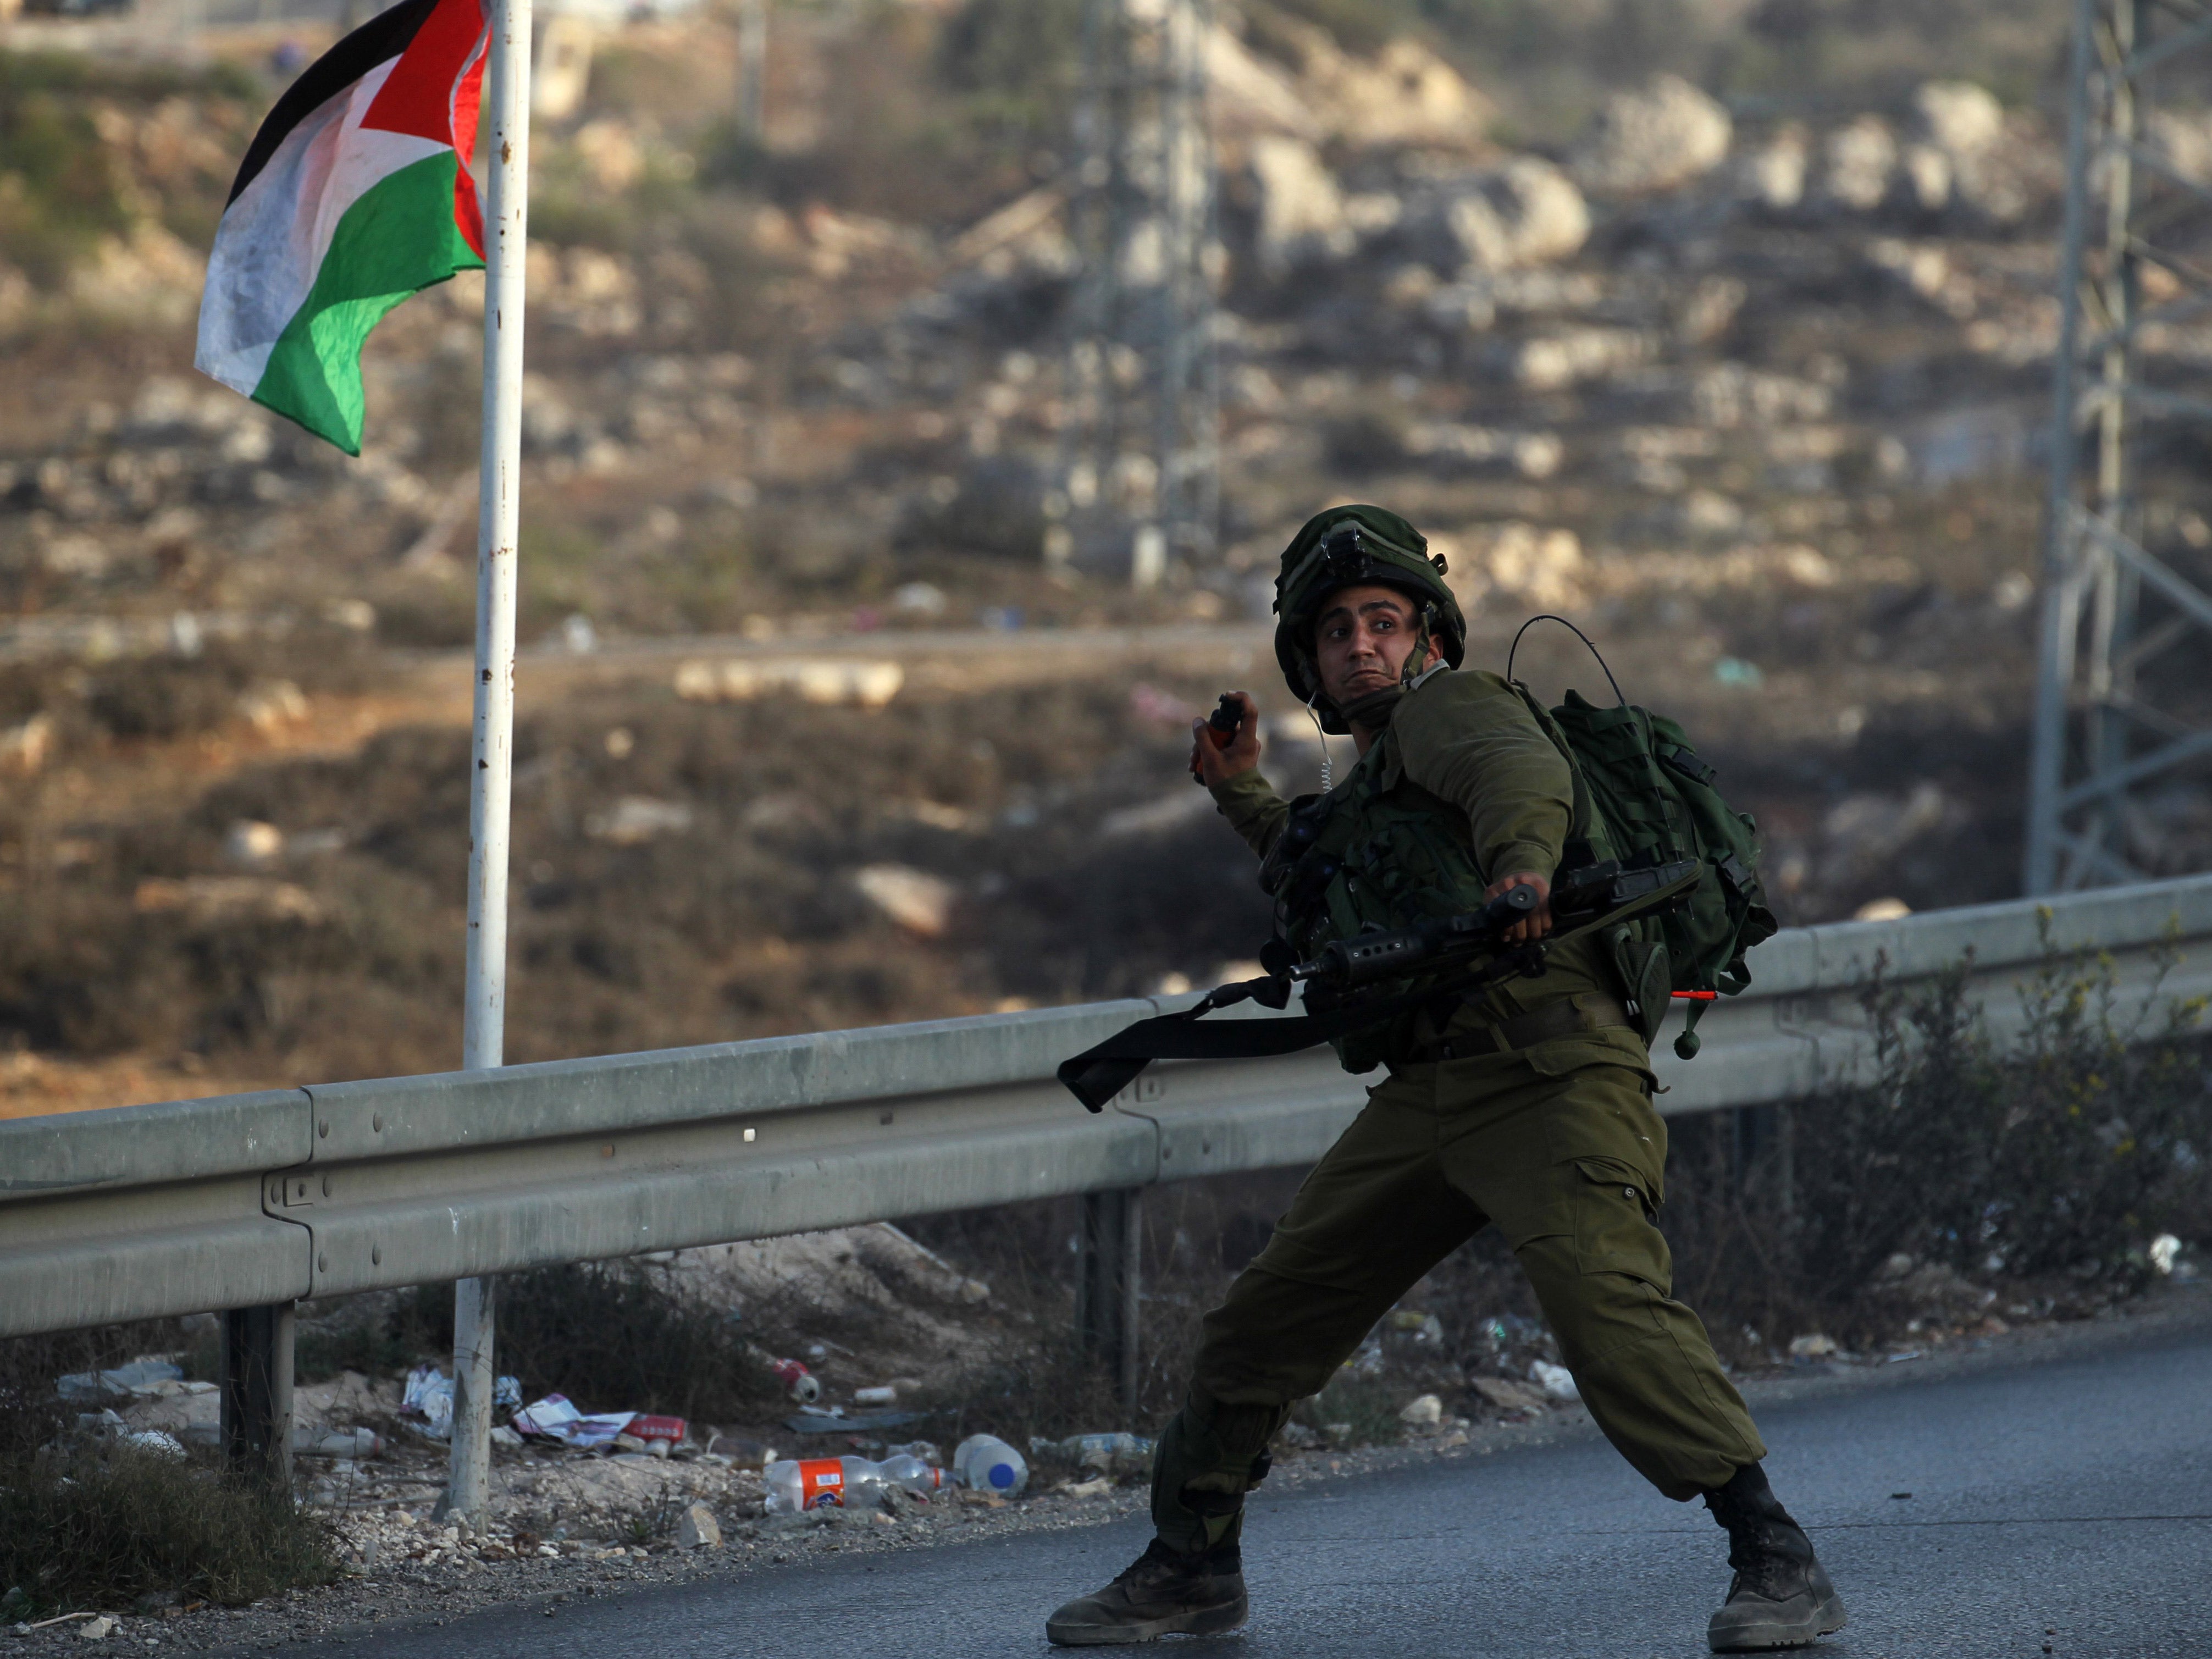 Tensions are running high in the West Bank following clashes